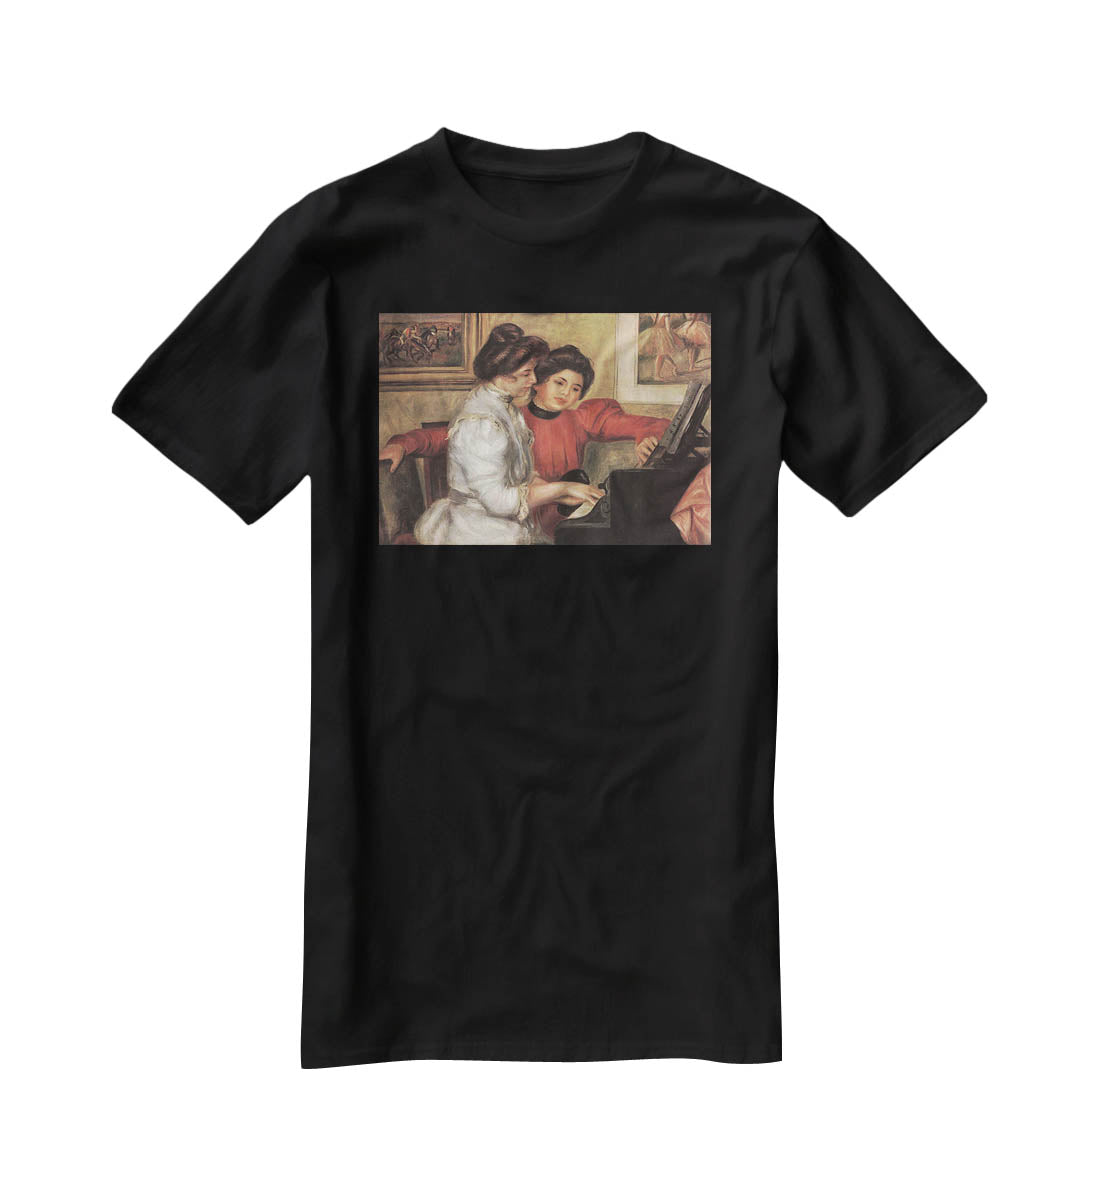 Yvonne and Christine Lerolle at the piano by Renoir T-Shirt - Canvas Art Rocks - 1